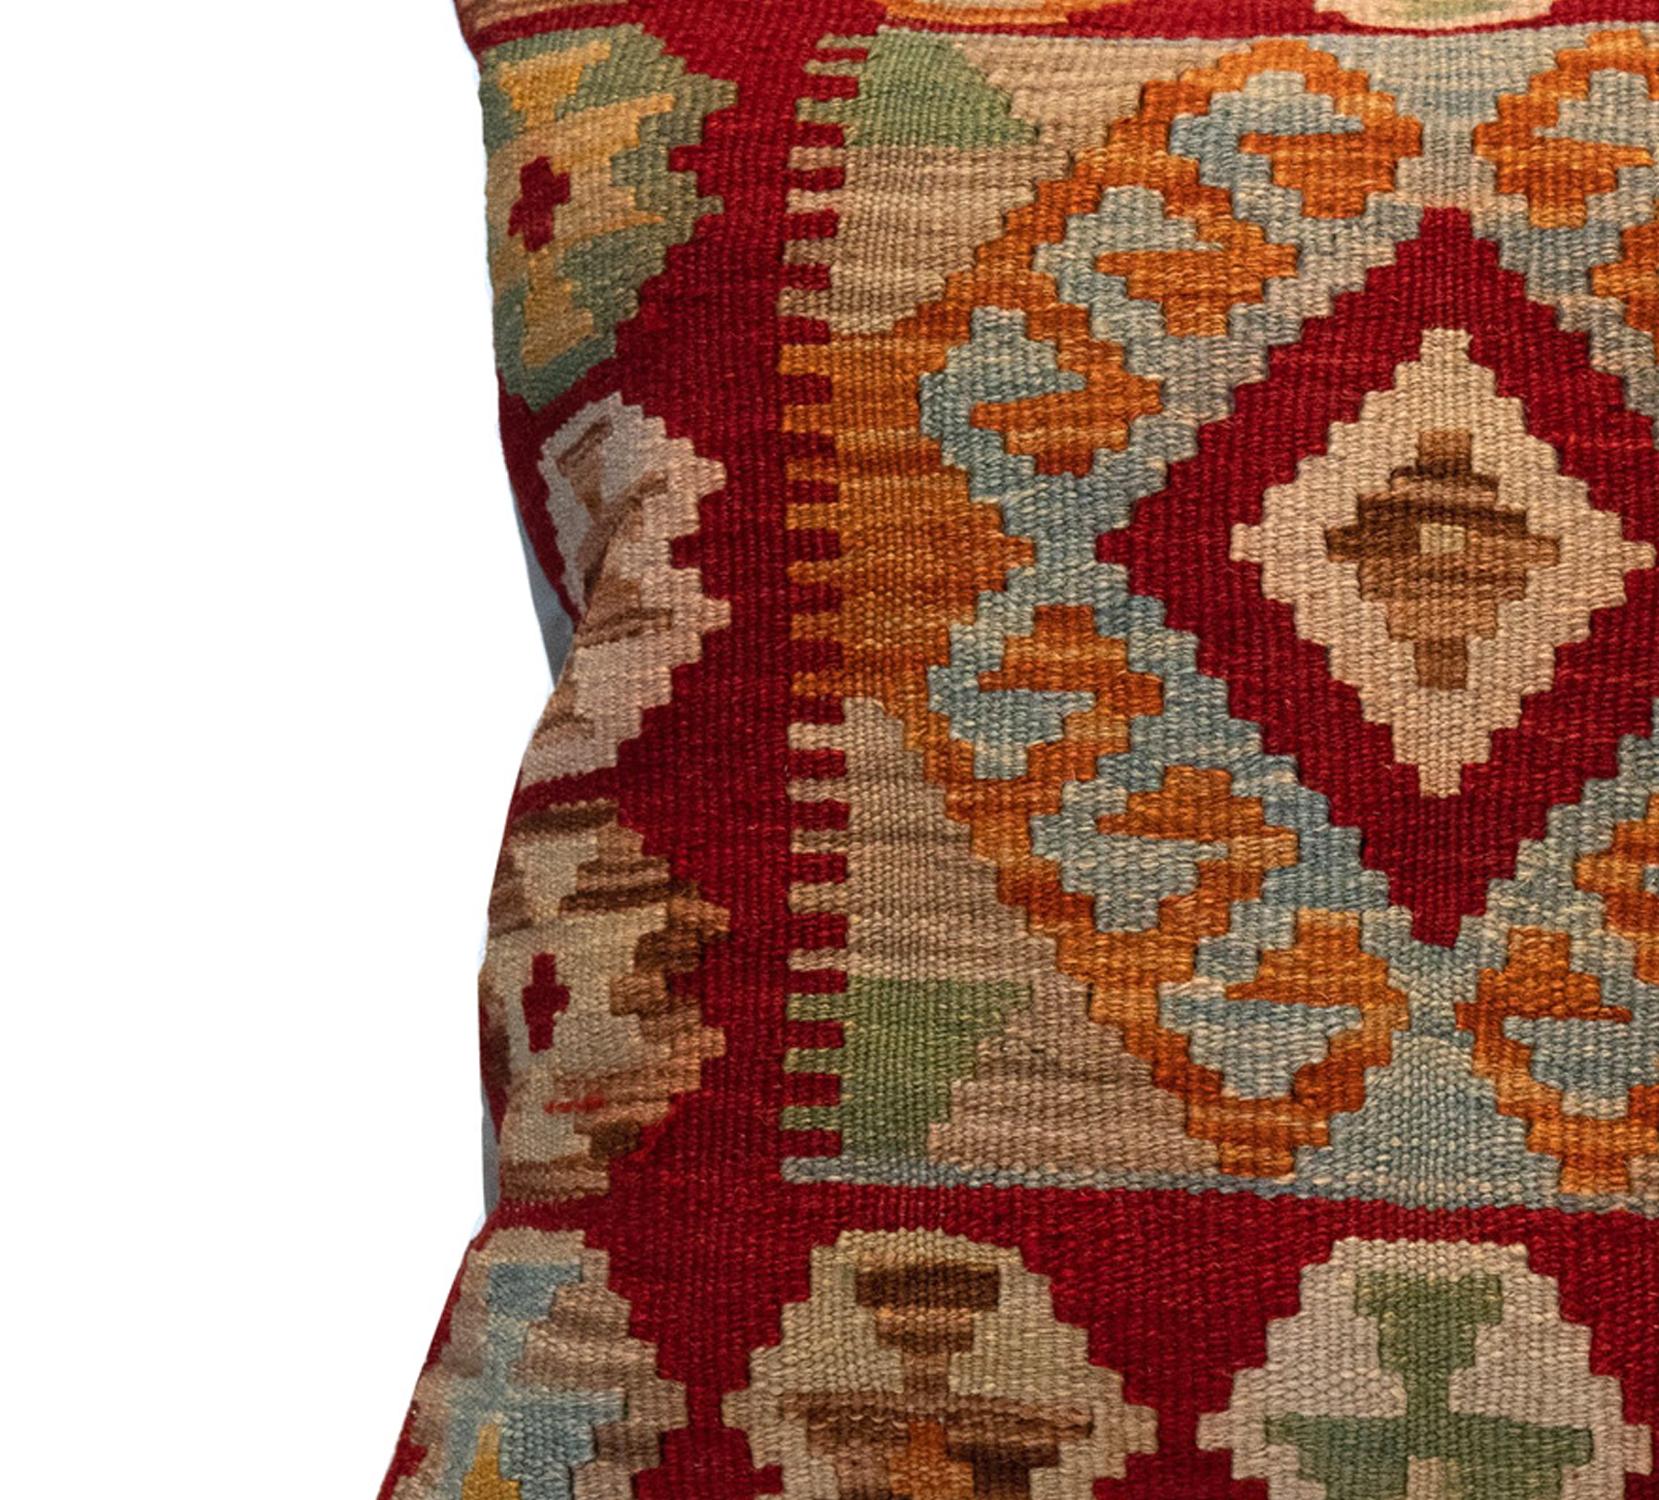 This fantastic cushion has been woven by hand using traditional kilim weaving techniques with hand-spun wool. Featuring a symmetrical geometric pattern woven in beautiful rustic colours. Including rust red, orange, beige and blue. These elegant